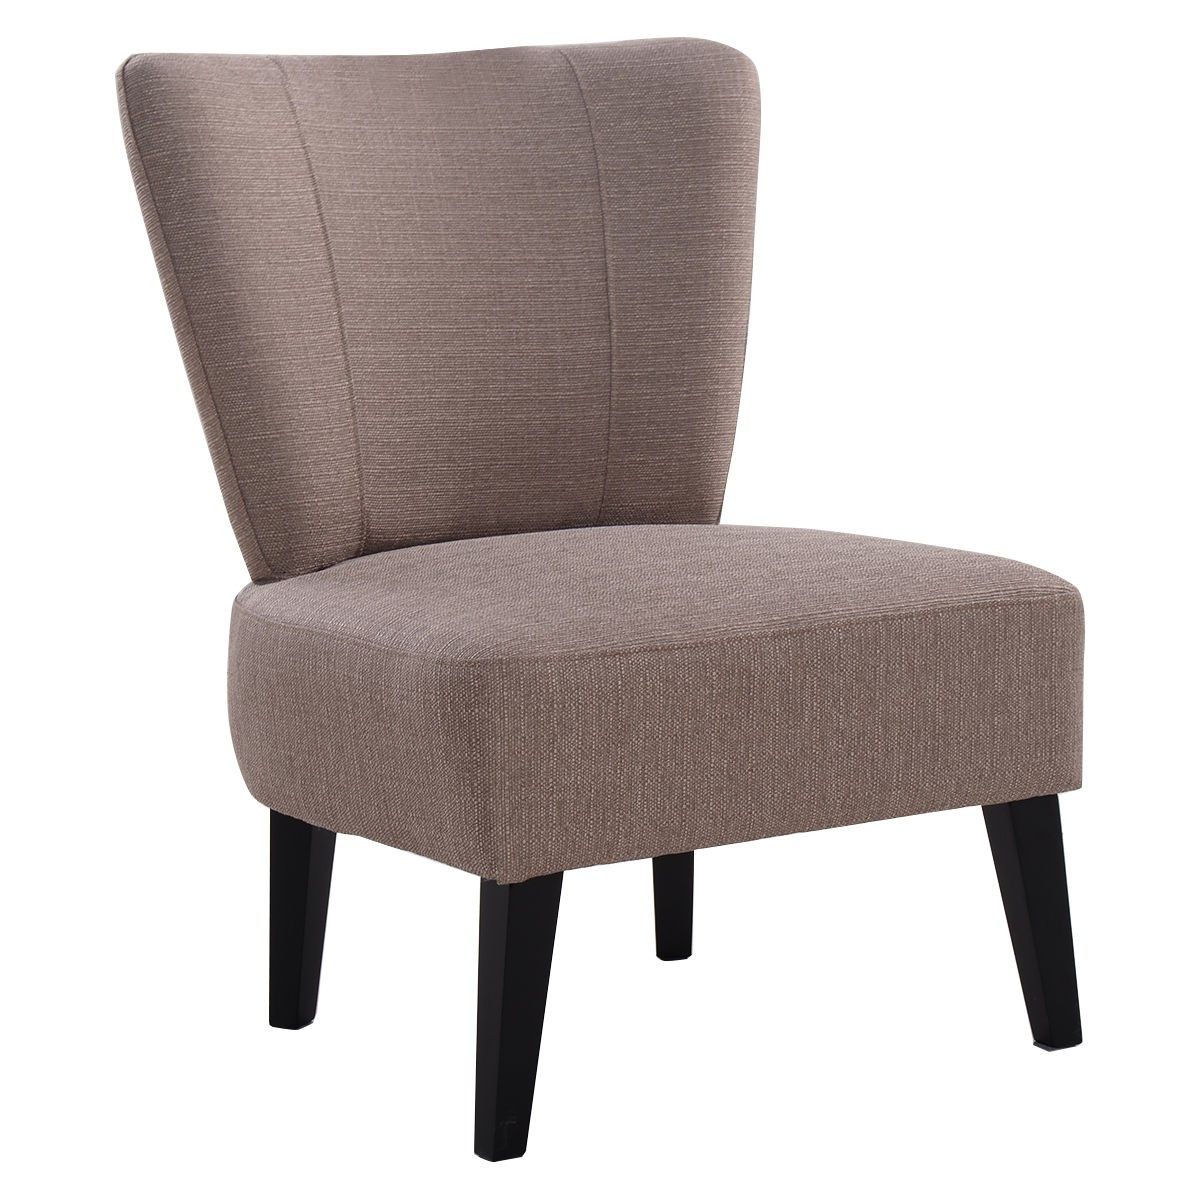 Upholstered Living Room Chairs
 Armless Accent Chair Upholstered Seat Dining Chair Living